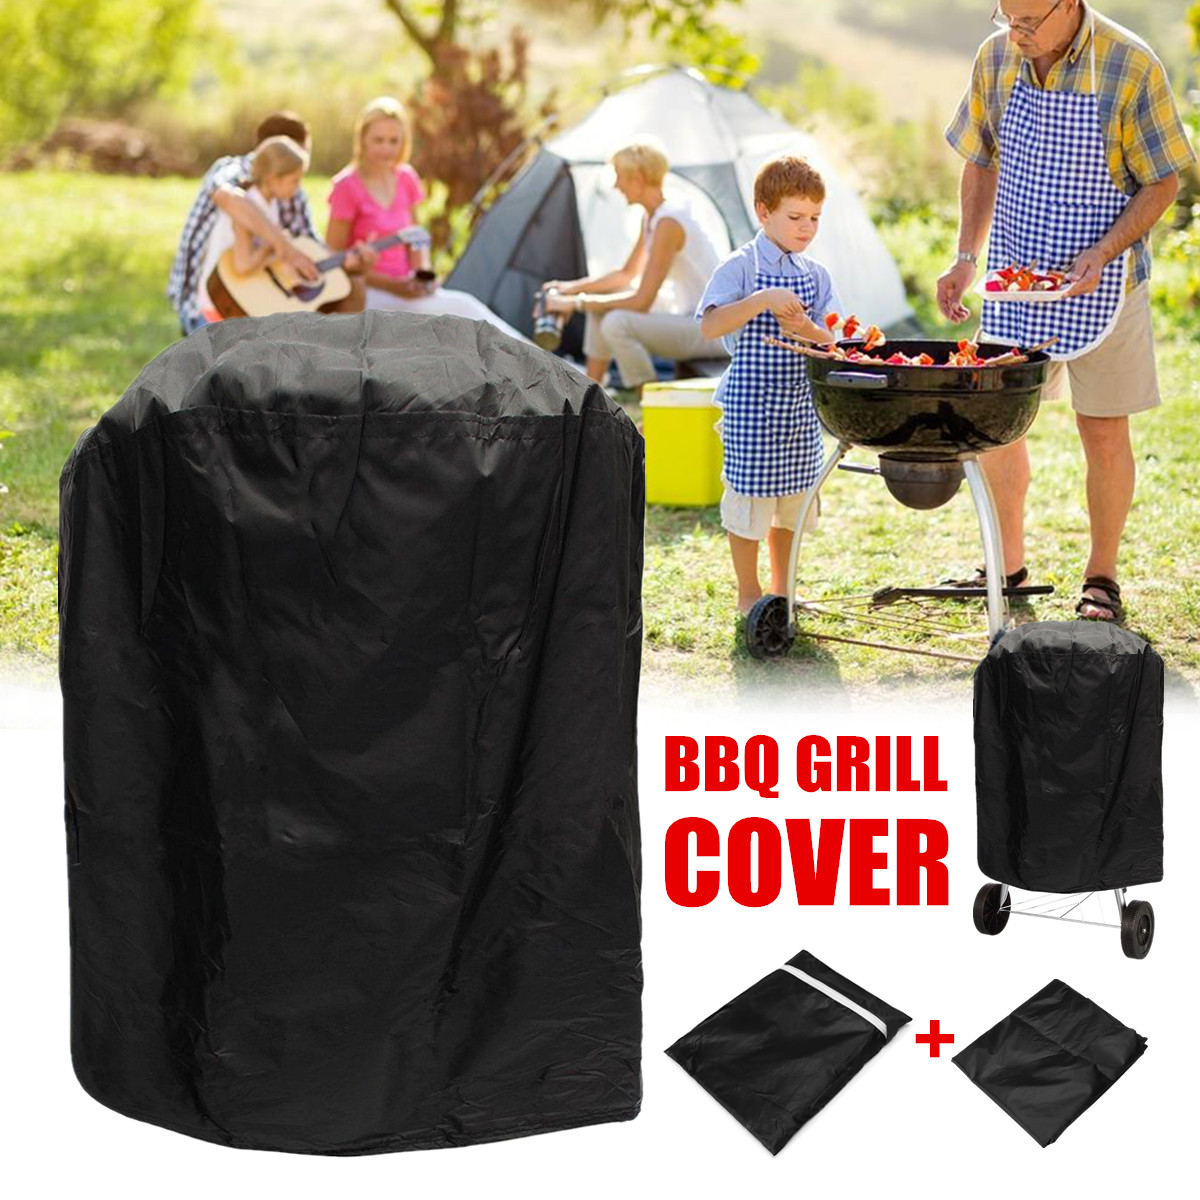 Outdoor-Waterproof-Round-Kettle-BBQ-Grill-Barbecue-Cover-Protector-UV-Resistant-1286049-1